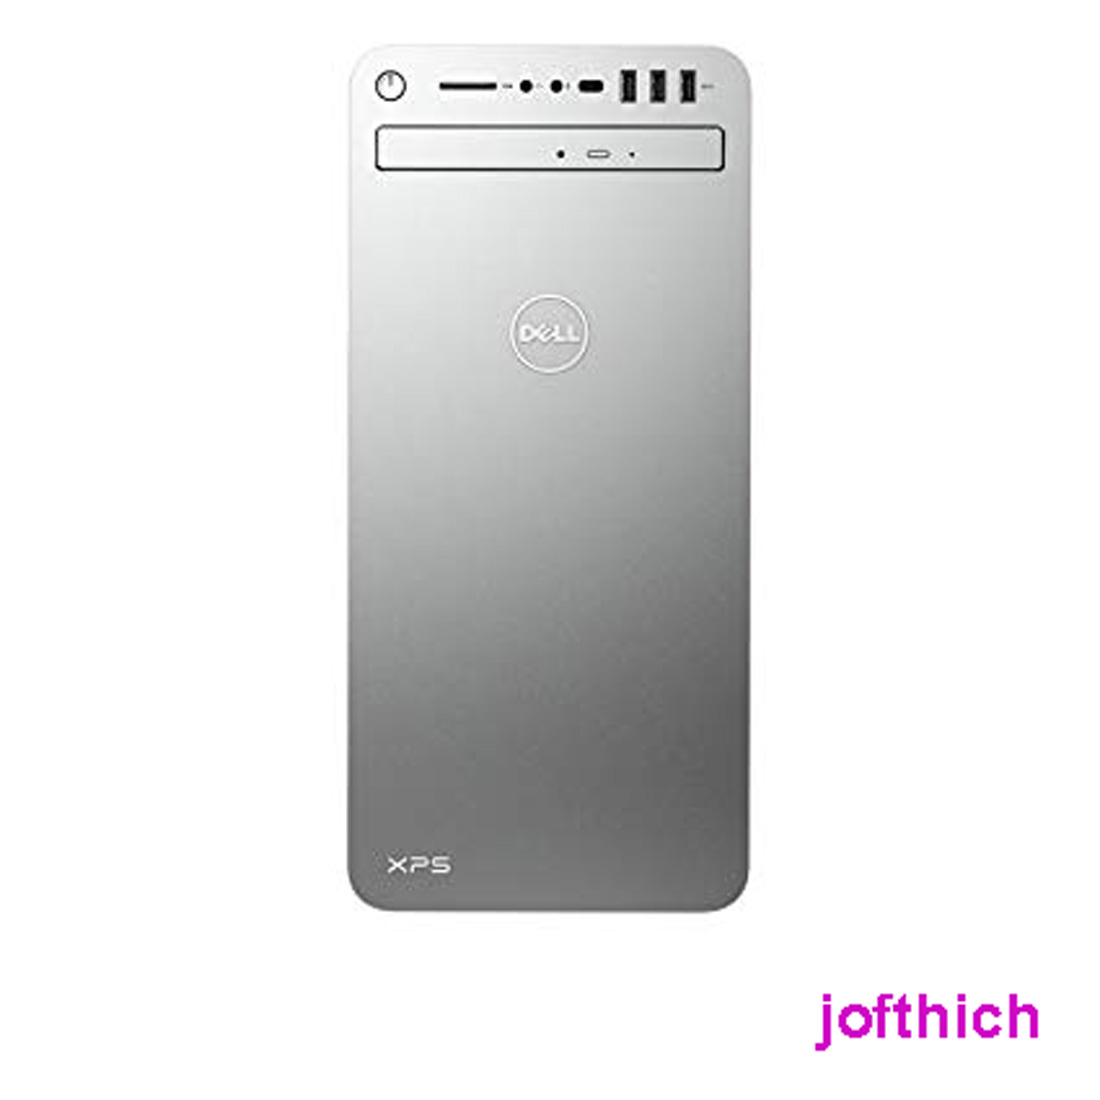 dell xps tower special edition